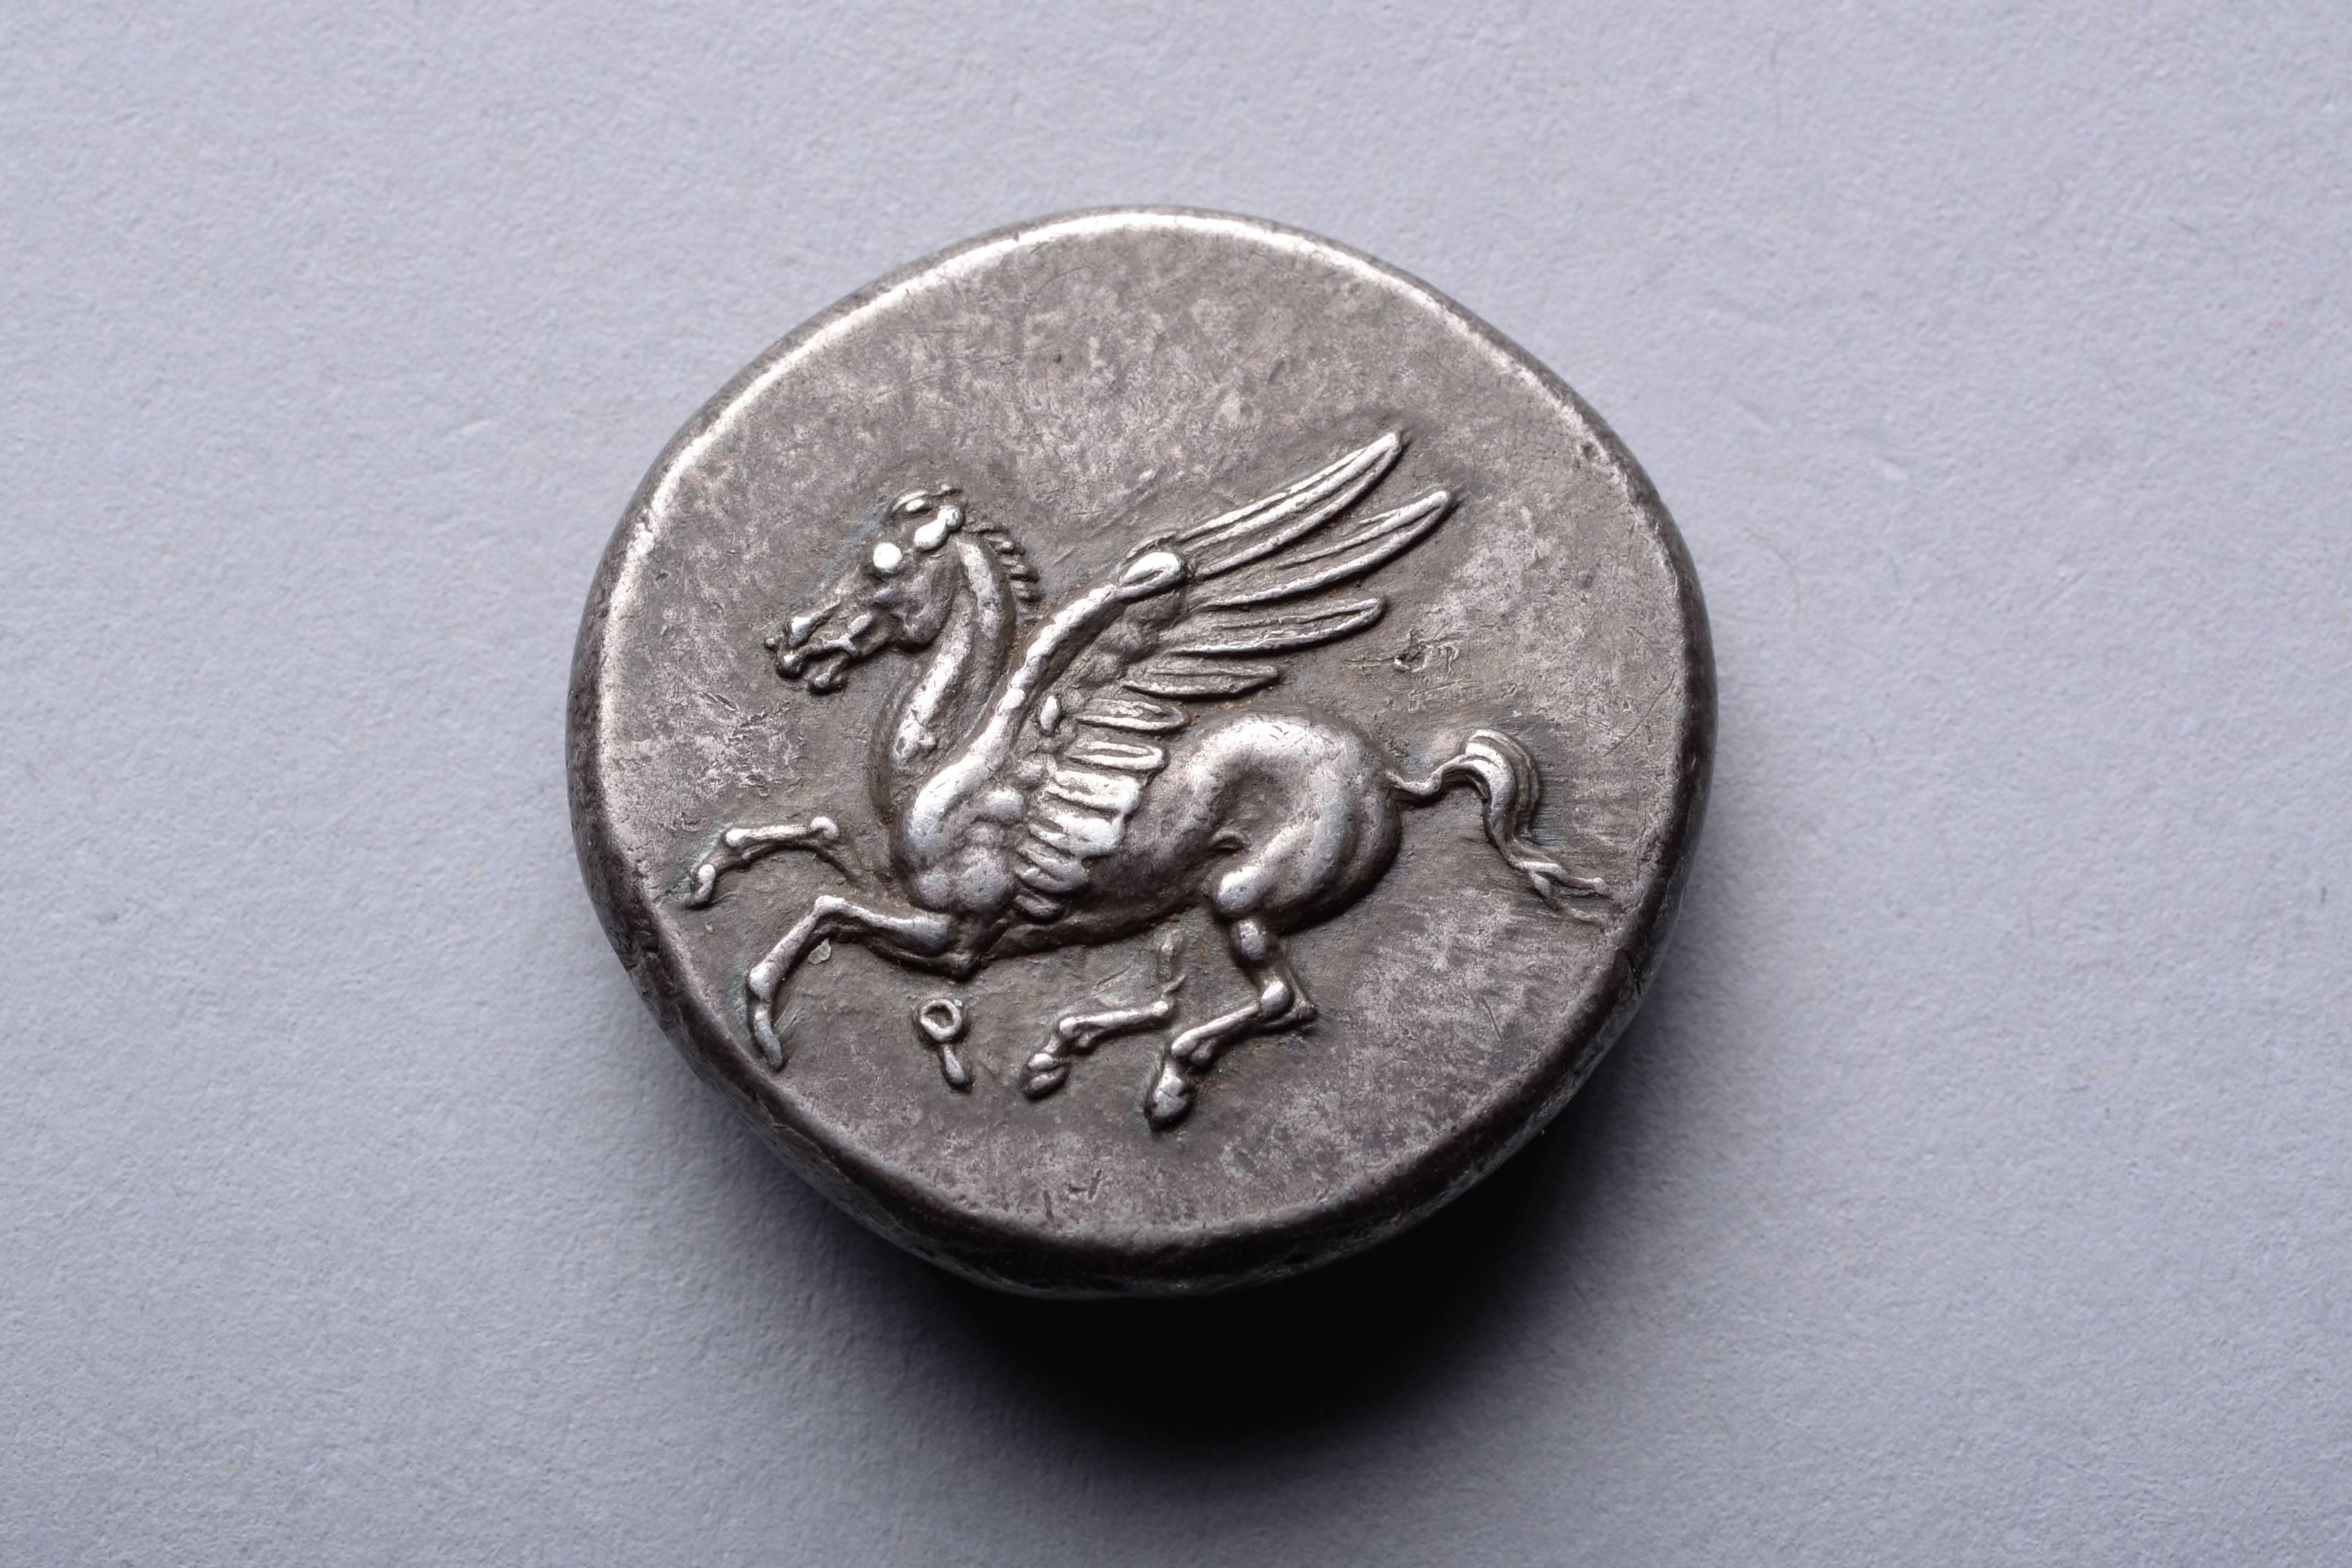 A silver stater from Corinth, circa 345-307 BC.

The obverse with Pegasus in flight. 

The reverse with the head of Athena, shown wearing a beaded necklace and Corinthian helmet, decorated with a laurel wreath. Aegis with Gorgon's head and A P